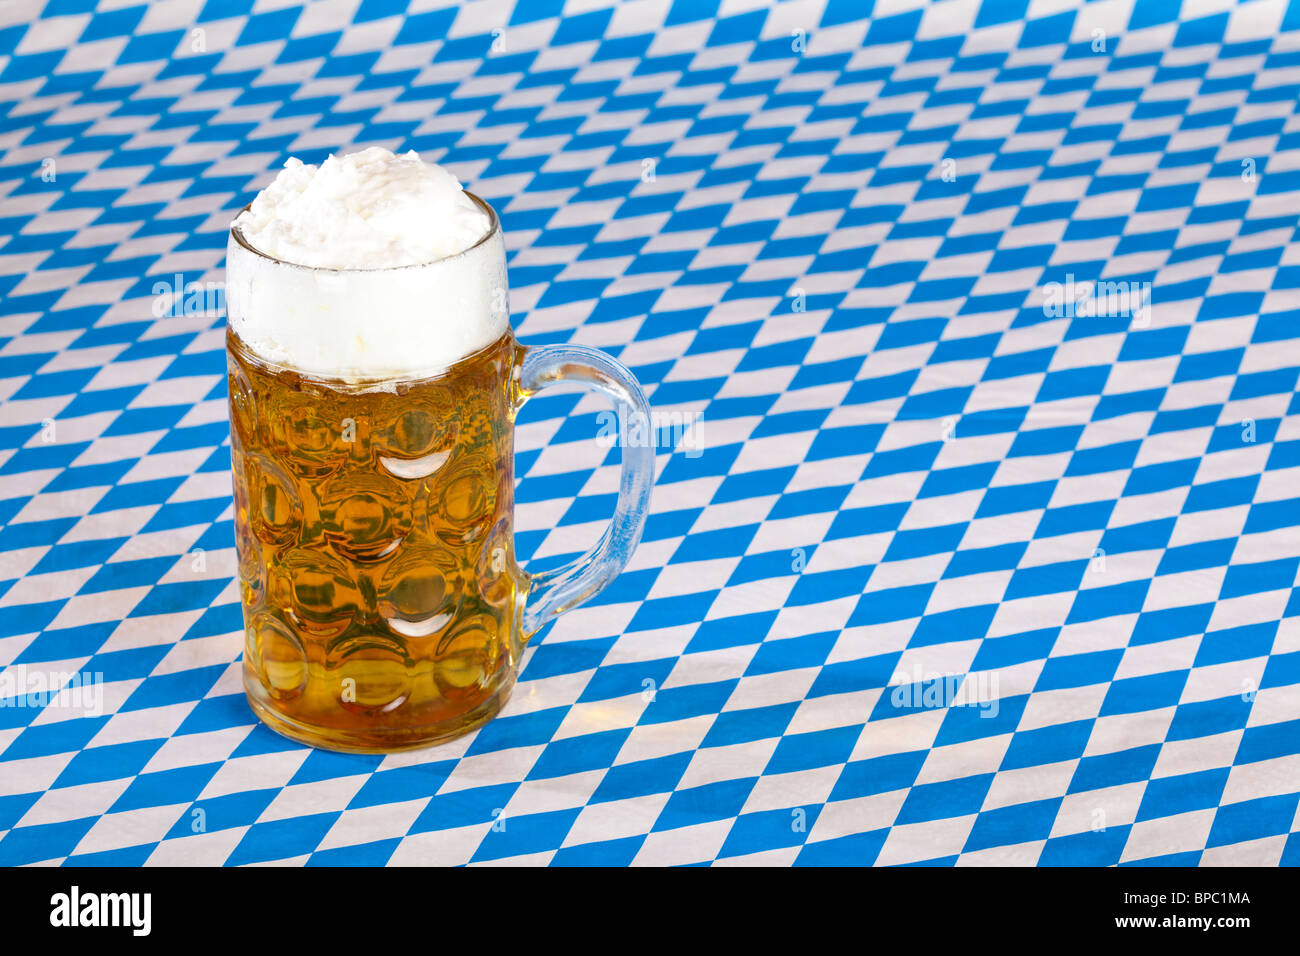 Oktoberfest beer stein with copy space and Bavarian flag in background. Stock Photo